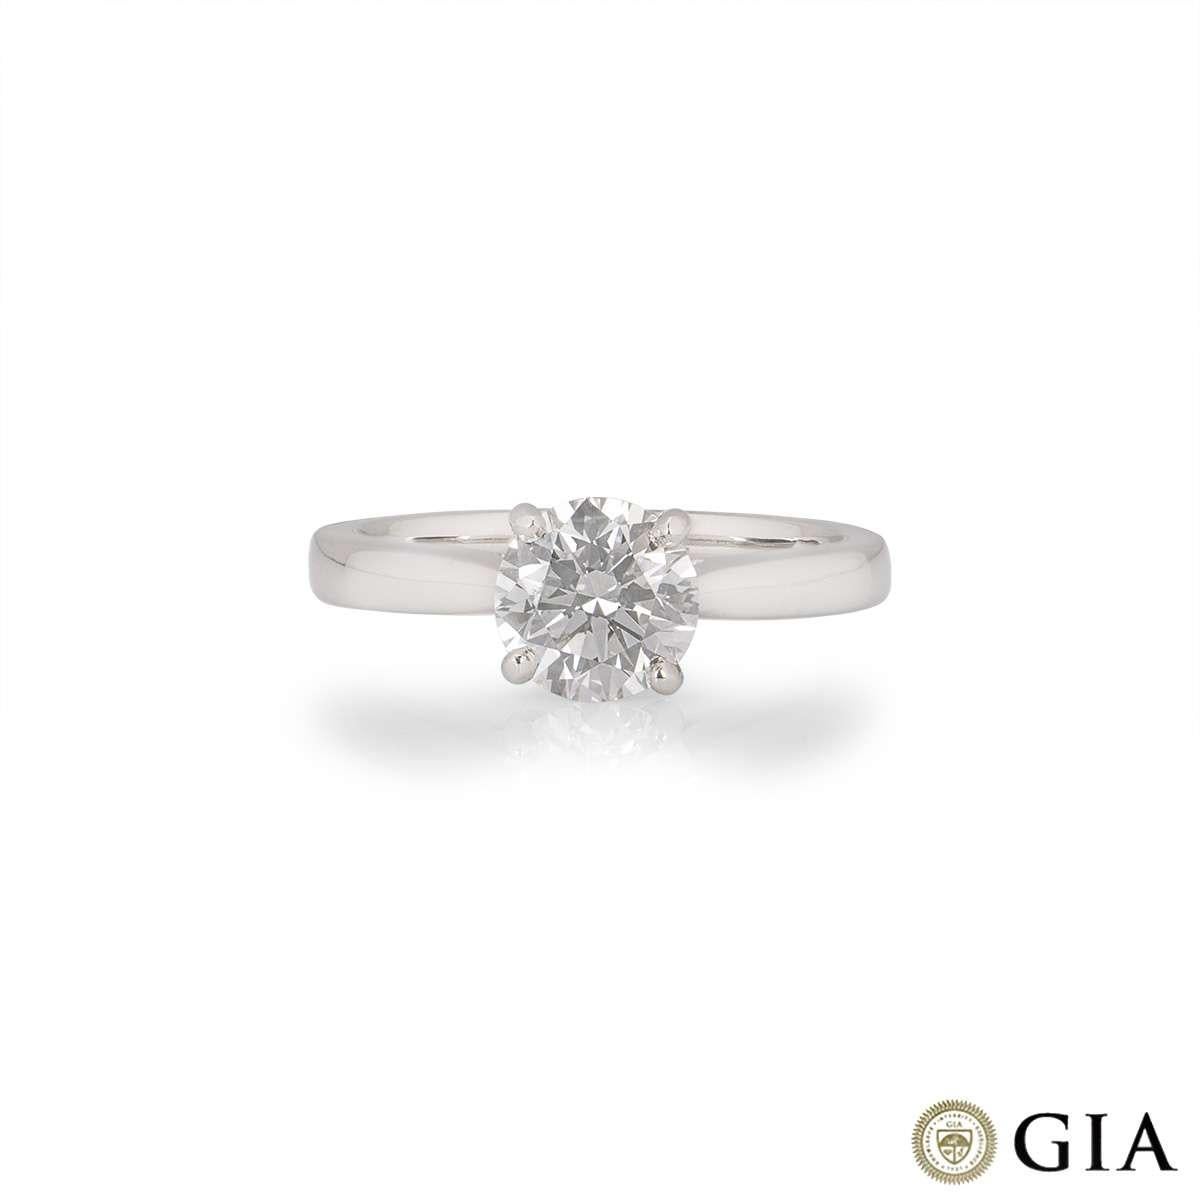 A stunning diamond ring in platinum. The round brilliant cut diamond weighs 1.30ct, is G colour and SI1 clarity. The diamond scores an excellent rating in all three aspects for cut, polish and symmetry - this is known as a 'triple excellent'